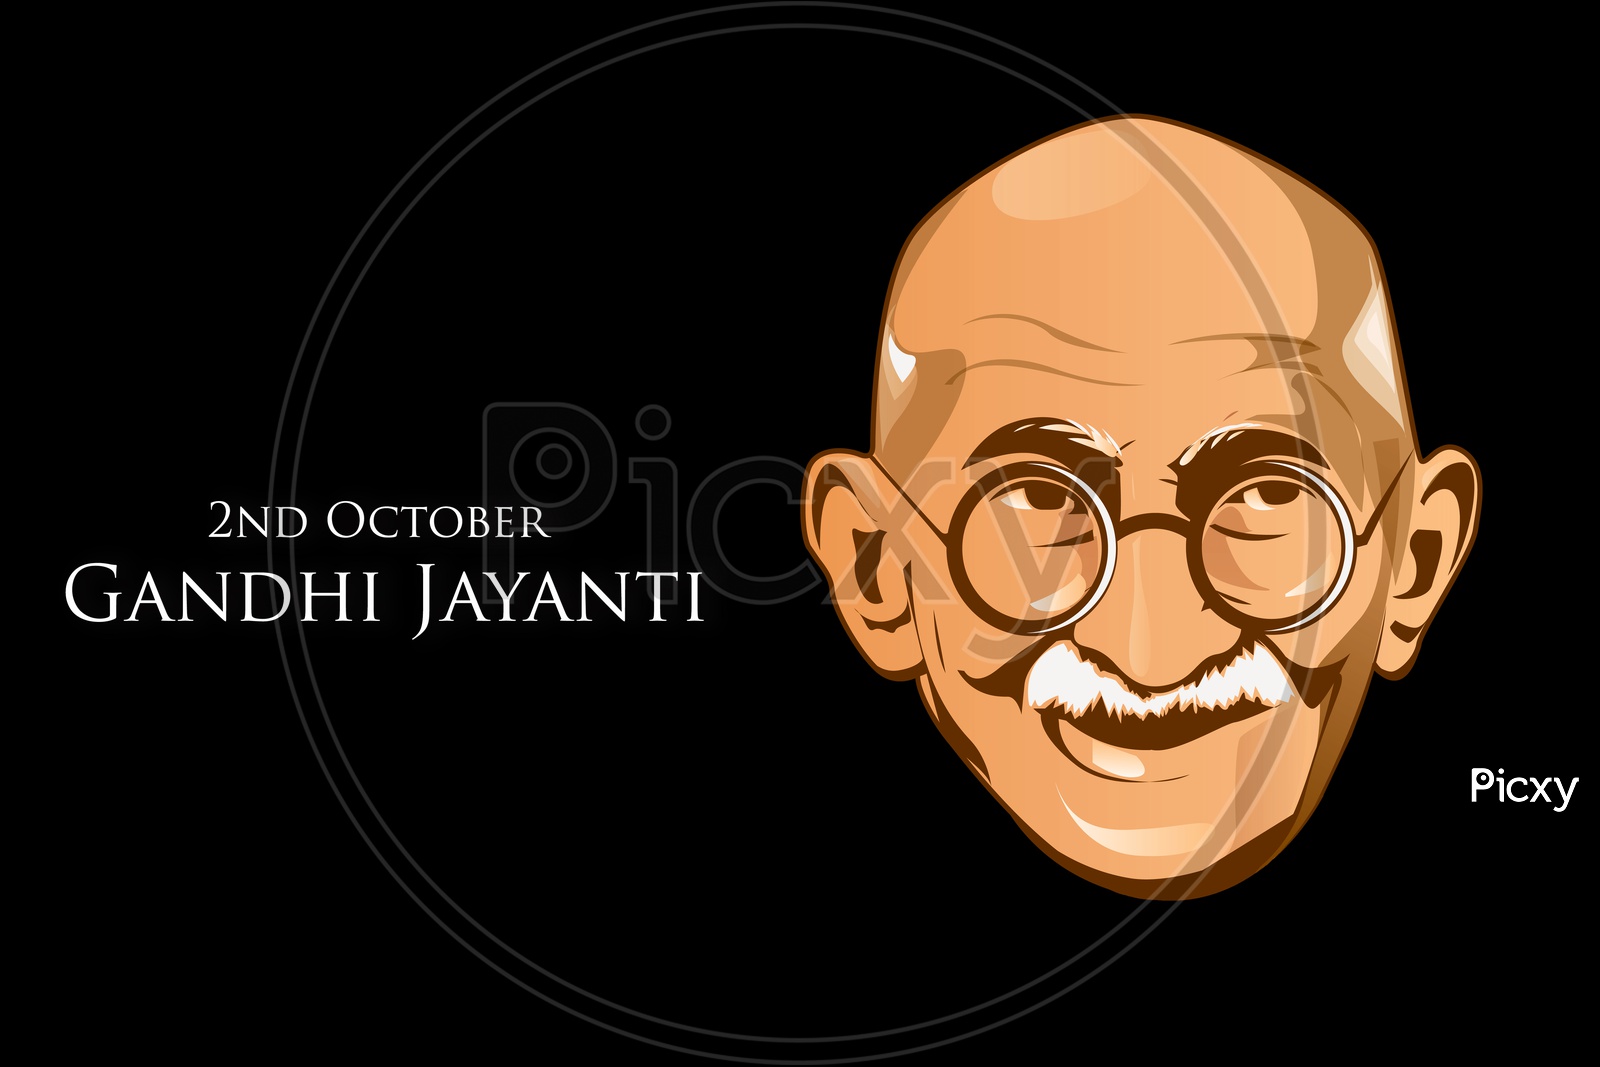 Abstract Illustrative Poster for Gandhi Jayanti on 2nd October on the eve of father of the nation Mohandas Karamchand Gandhi Birthday in India